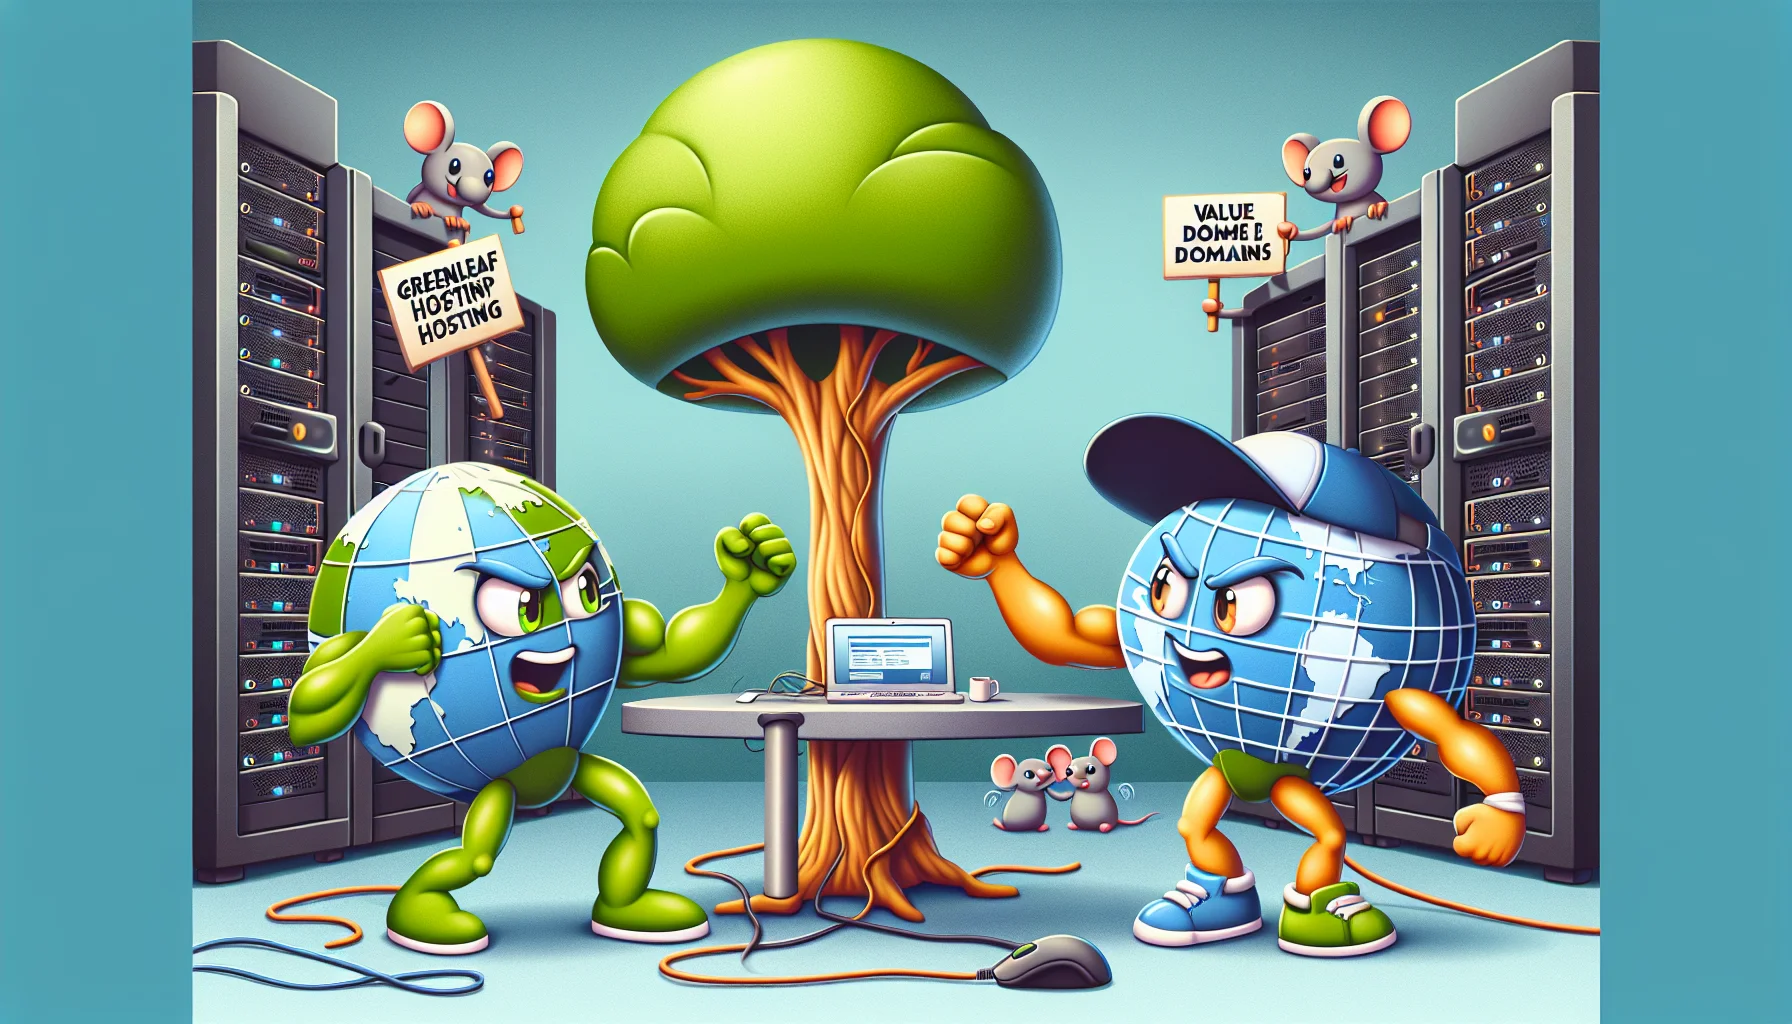 Create a humorous and captivating image that depicts a scenario of web hosting. In this scene, imagine two cartoon characters emblematic of hosting companies in a friendly competition. One character, representing 'GreenLeaf Hosting', is shaped like a friendly, resilient tree with a computer monitor embedded in its trunk. The other character, called 'ValueDome Domains', takes the form of a cap-wearing dome imbued with a globe map design. They are arm wrestling on a server-looking table with network cables, while computer mice cheer them on from the sides. The background should incite the viewer about the excitement of web hosting.